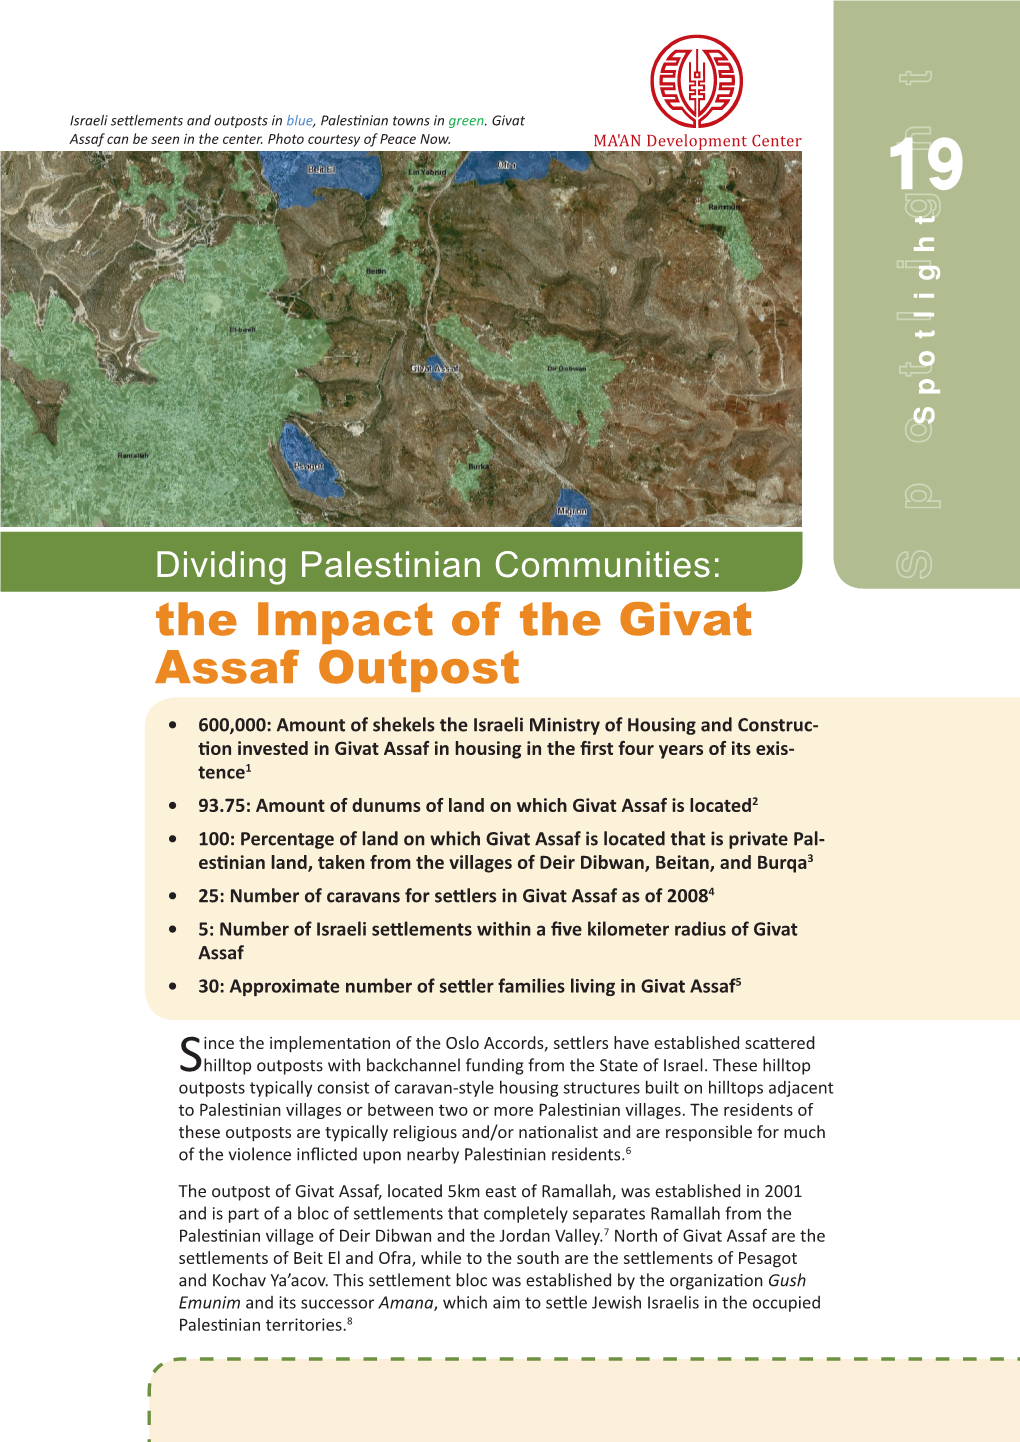 The Impact of the Givat Assaf Outpost